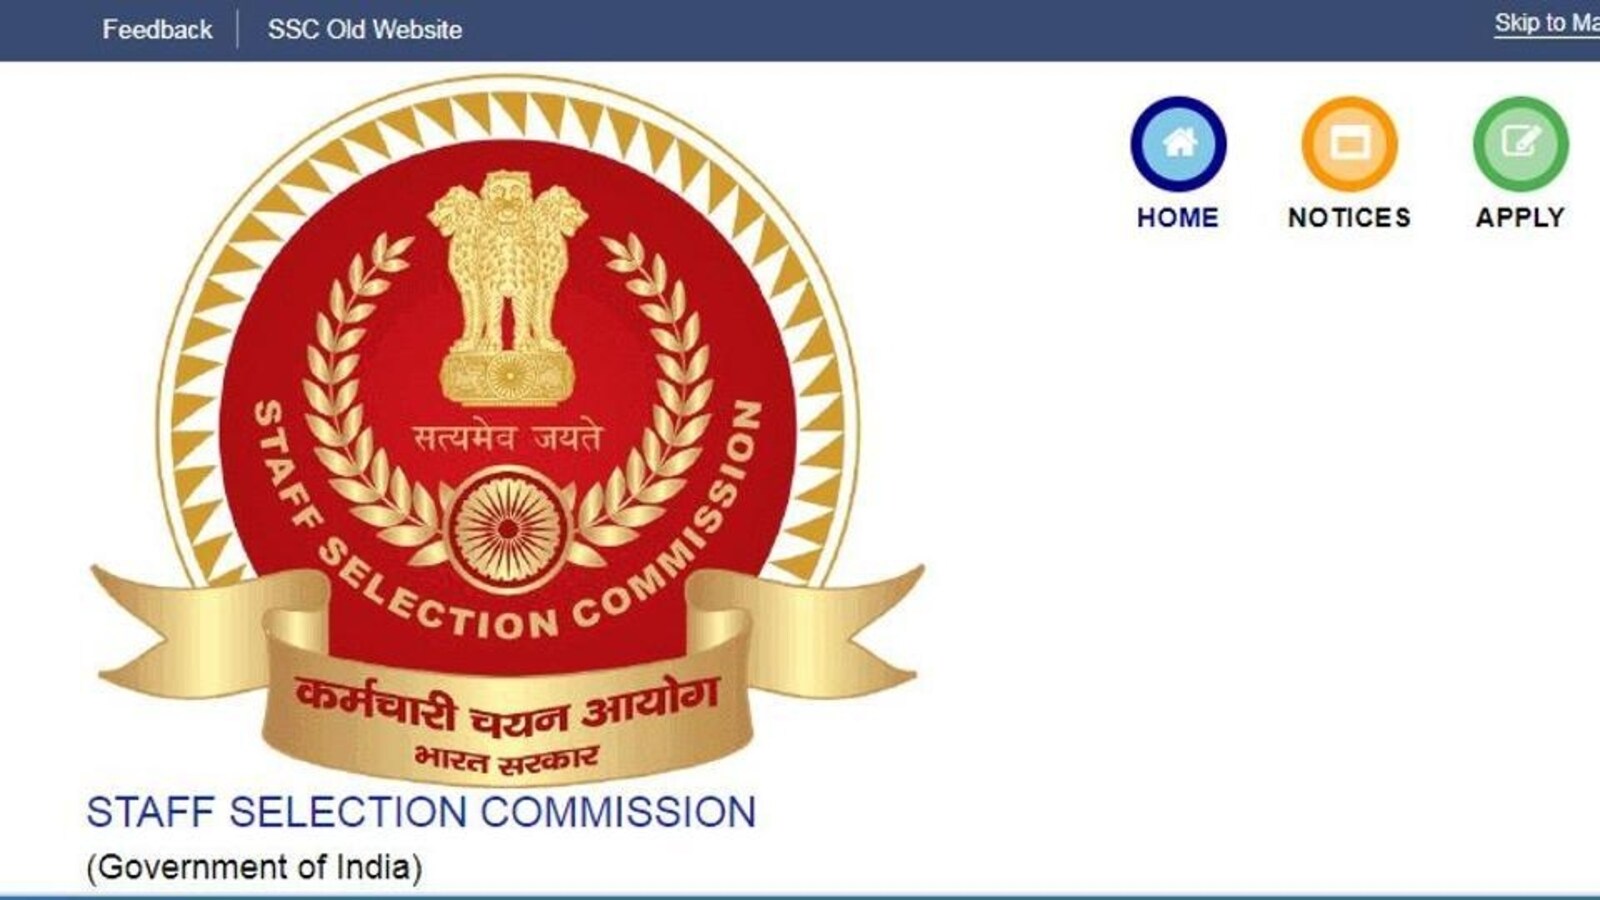 SSC CGL 2022: Important notice released on ssc.nic.in, see details